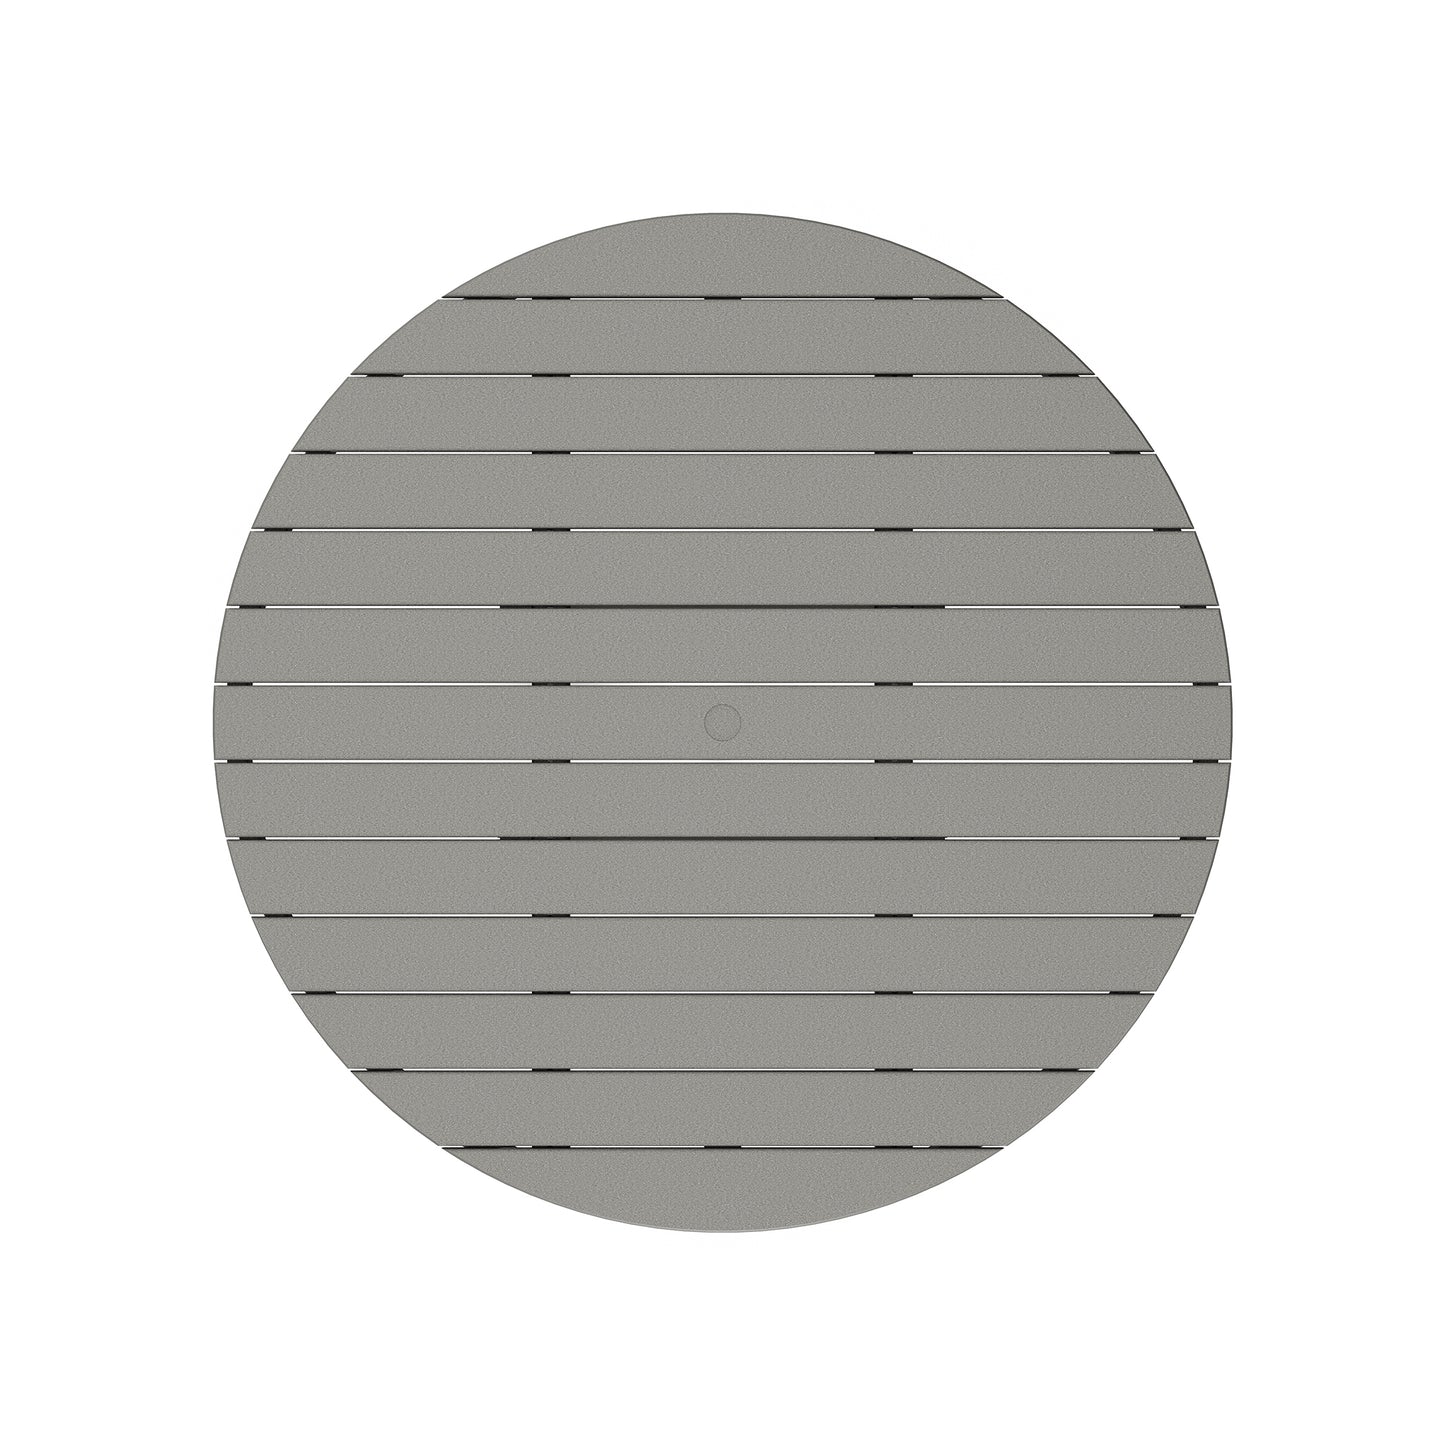 Circular grey structure with an array of horizontal slats, featuring a central circular indentation. The design is minimalistic and symmetrical, perfect as a POLYWOOD Outdoor 48" Round Dining Table.